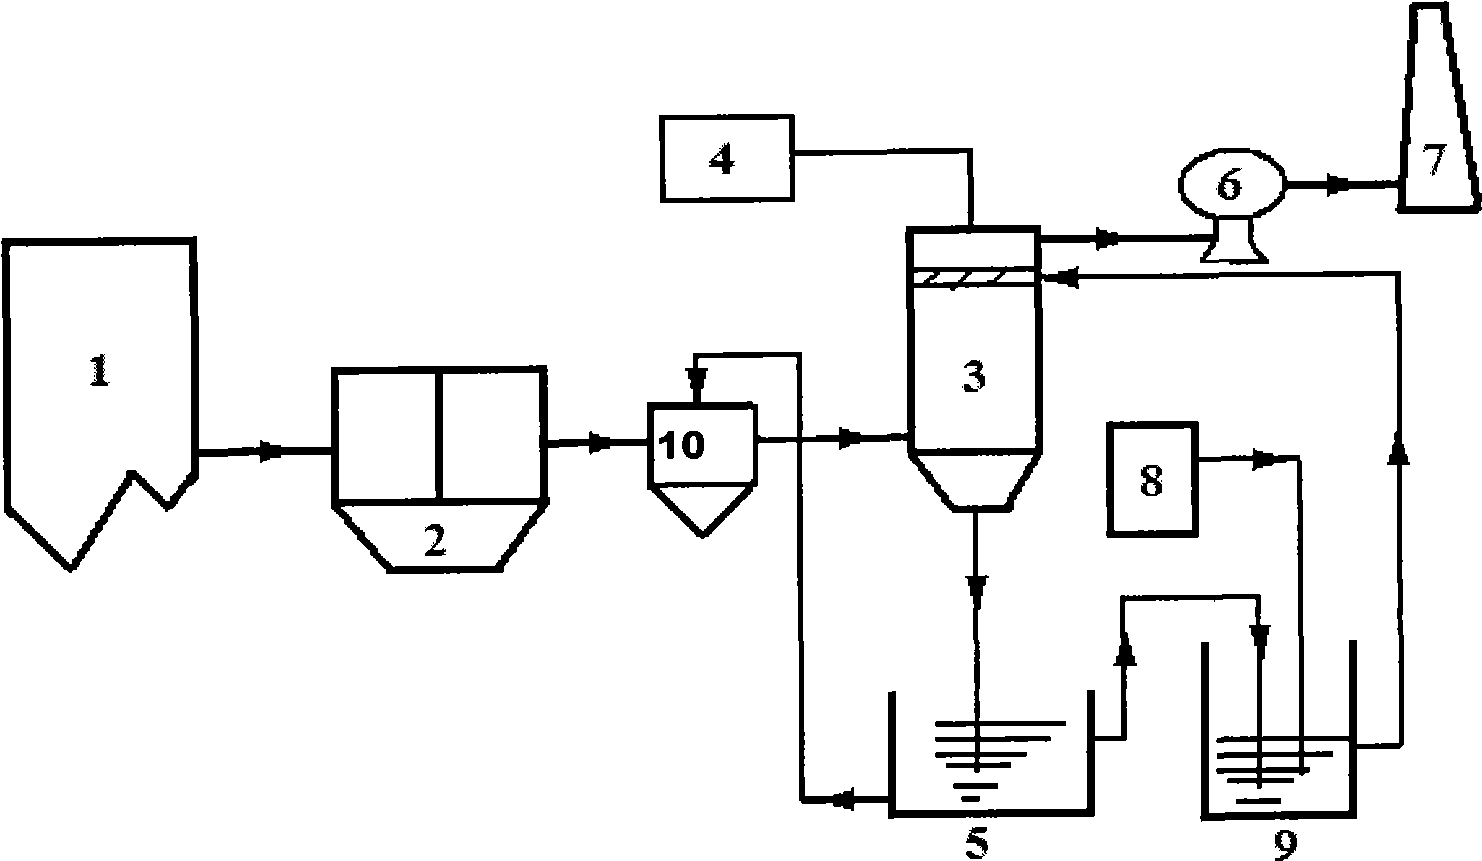 Method for simultaneously removing PM2.5 granules, SO2 and NOx from flue gas and recycling by-product